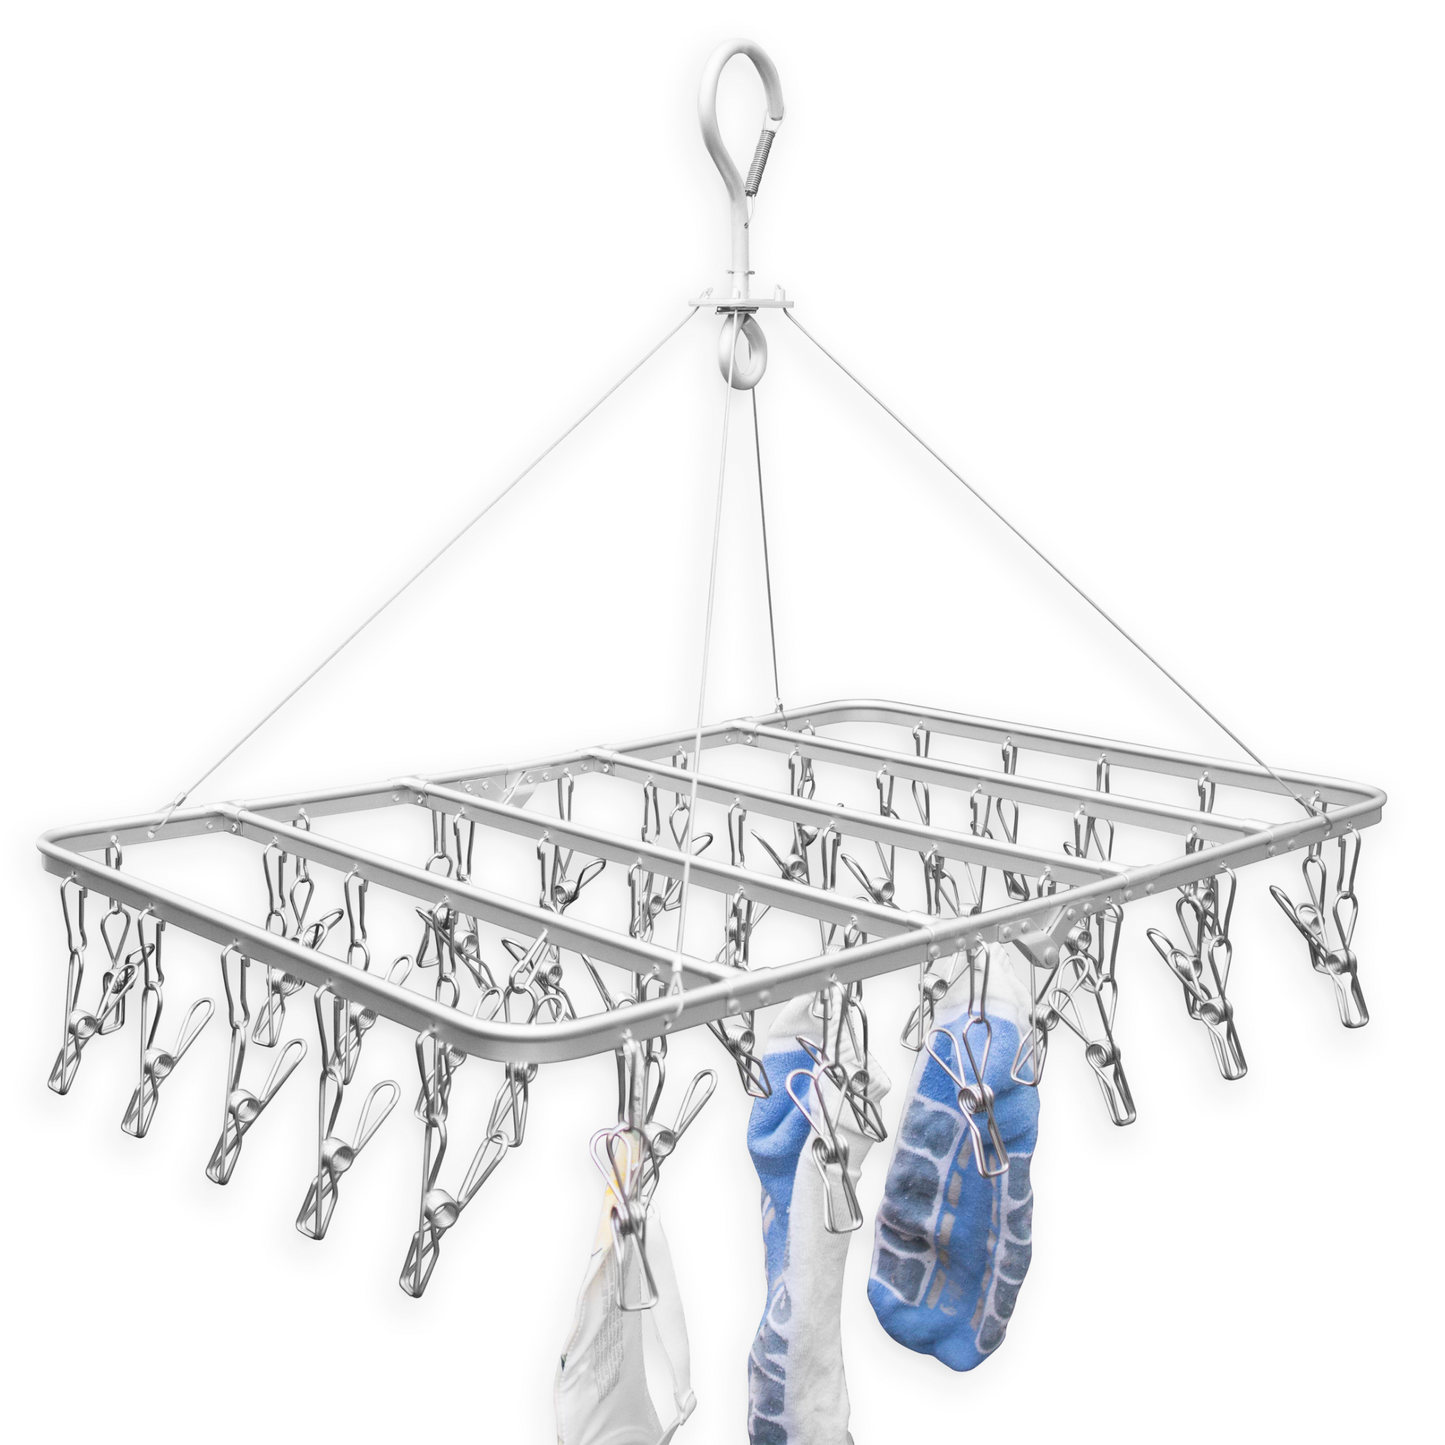 Premium Folding Aluminium Clothes Airer with 42x Marine Grade Stainless Steel Pegs